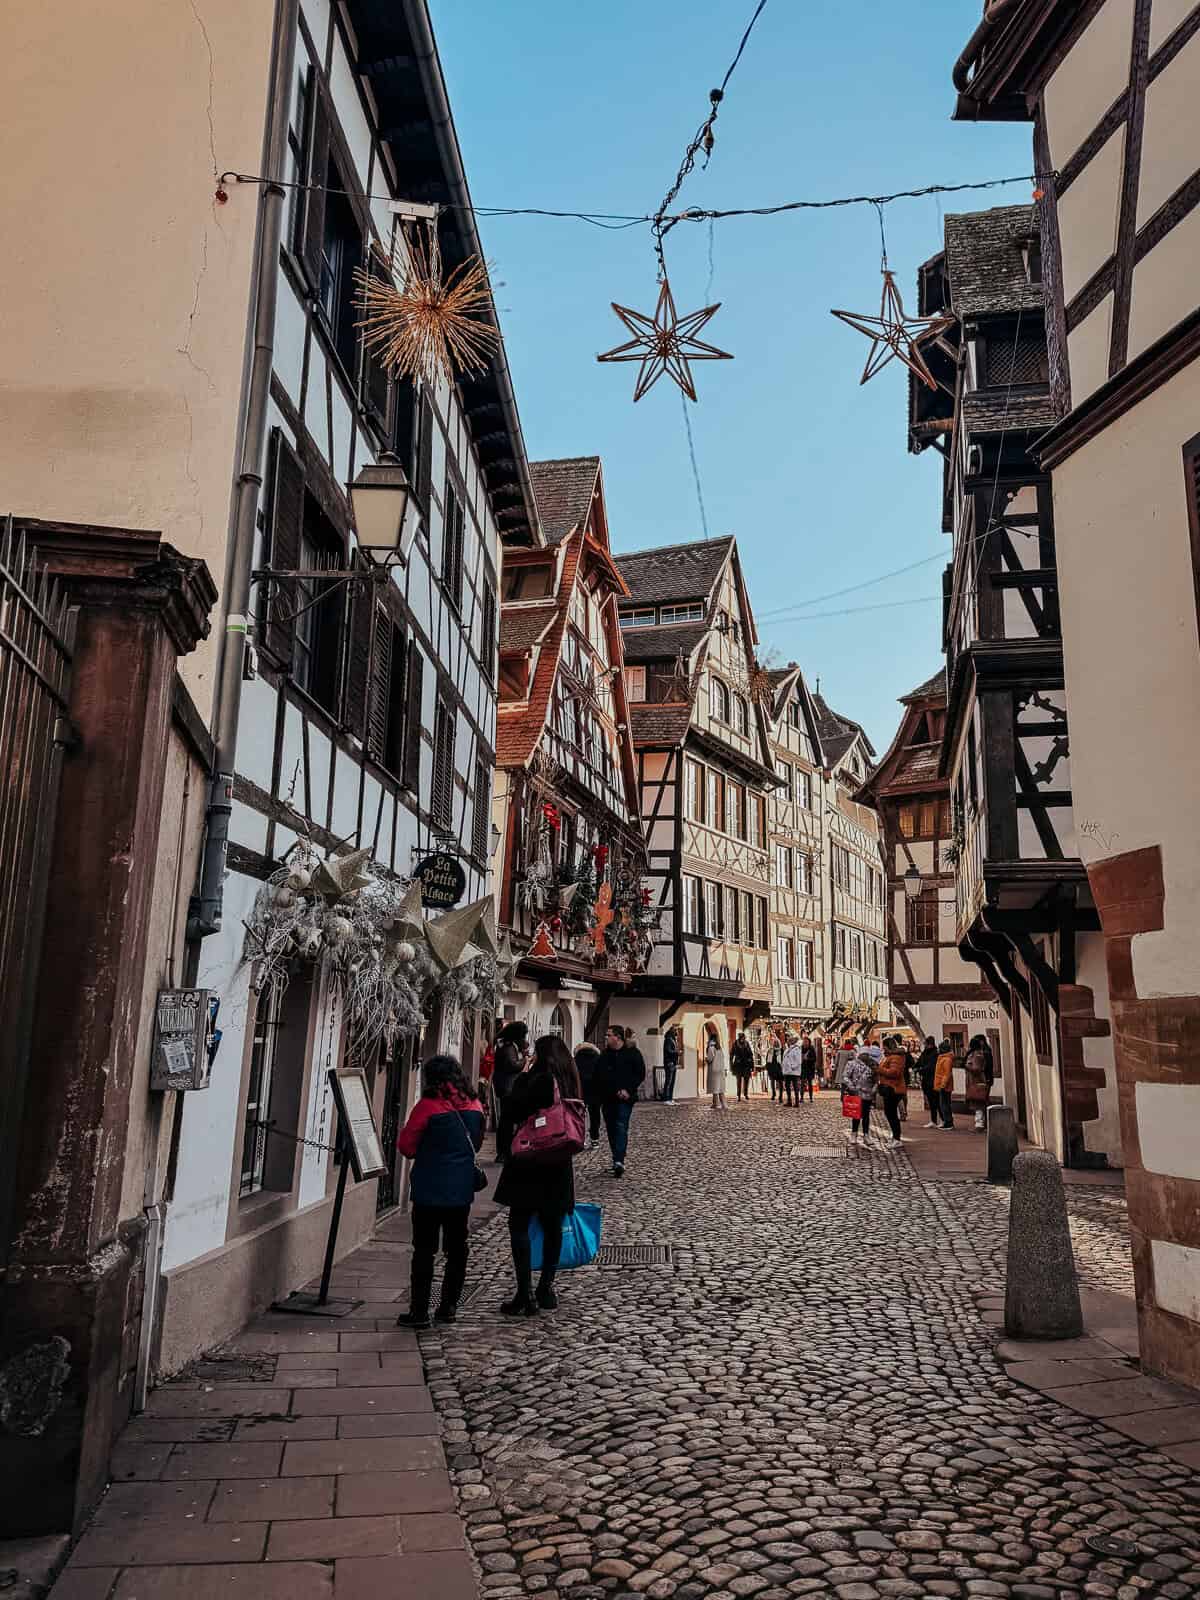 A bustling narrow street lined with traditional timber-framed houses and festive decorations, filled with shoppers enjoying the holiday atmosphere